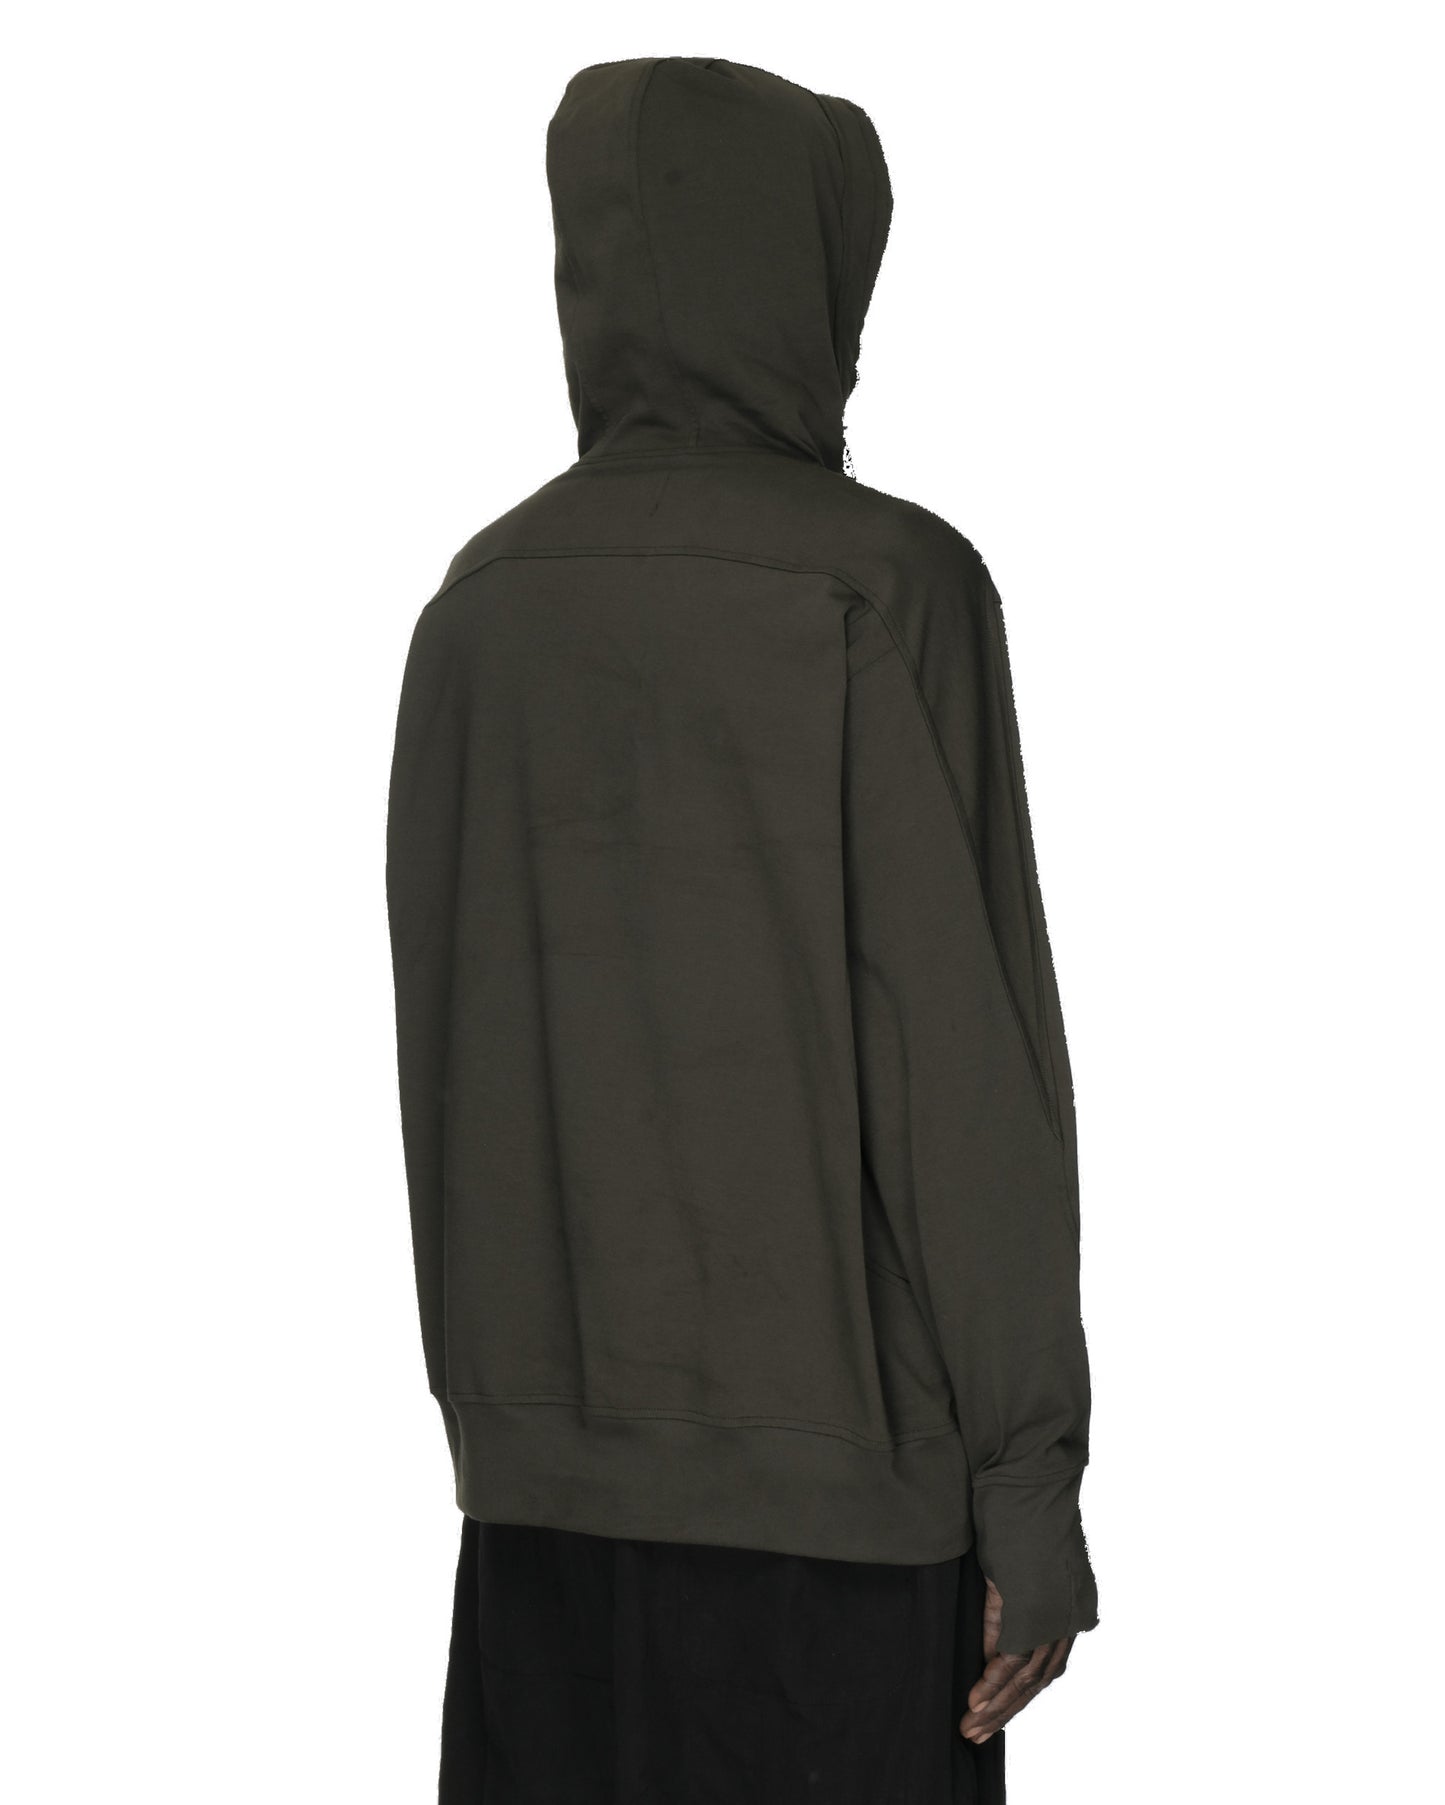 VIC HOODED SWEATER